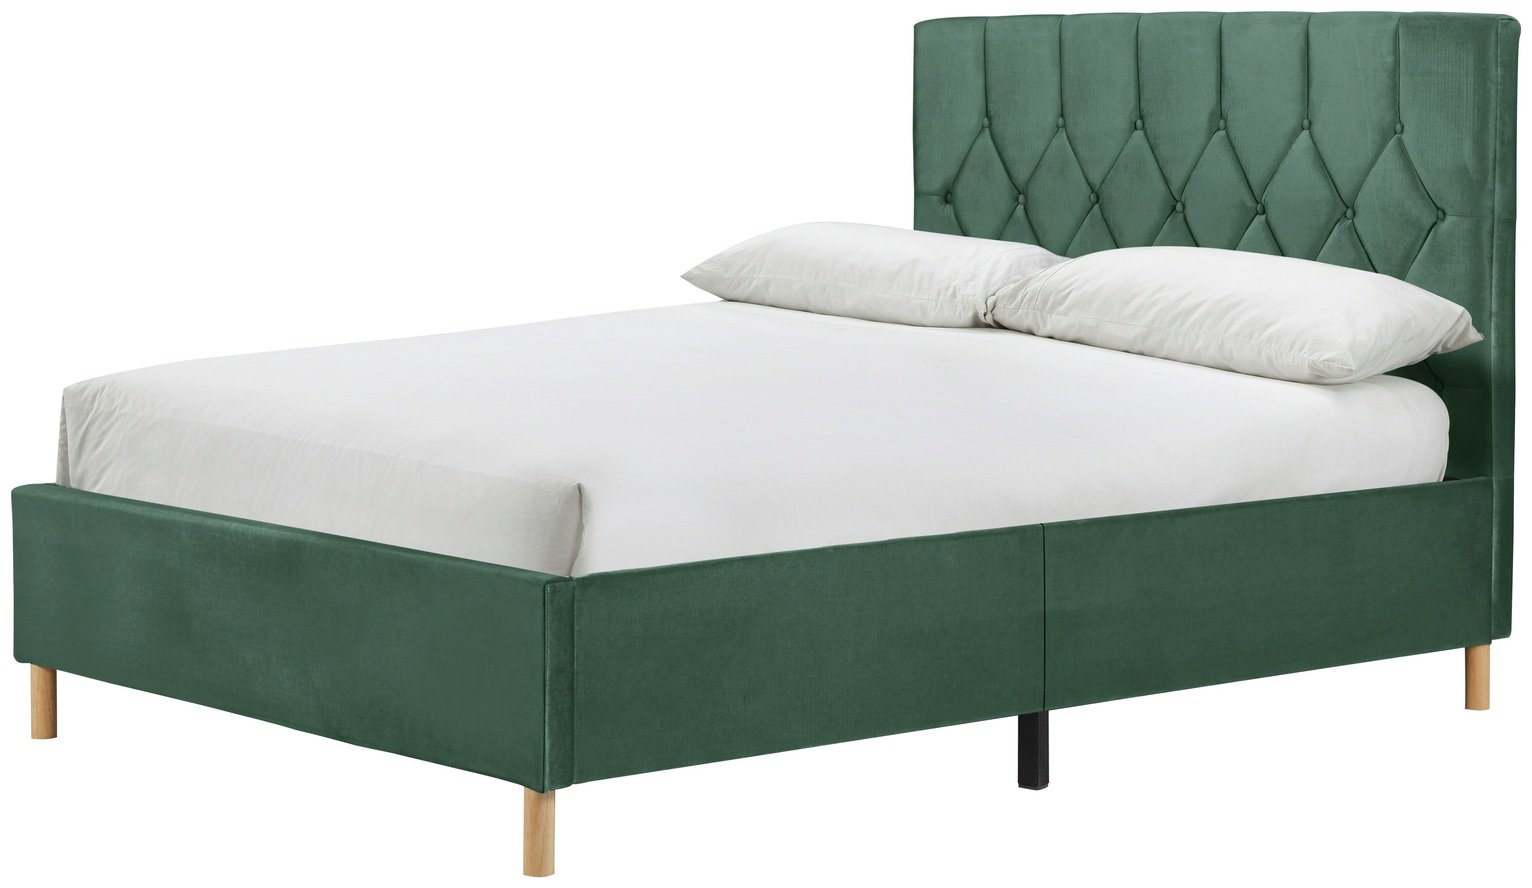 Birlea Loxley Small Double Fabric Bed Frame - Green